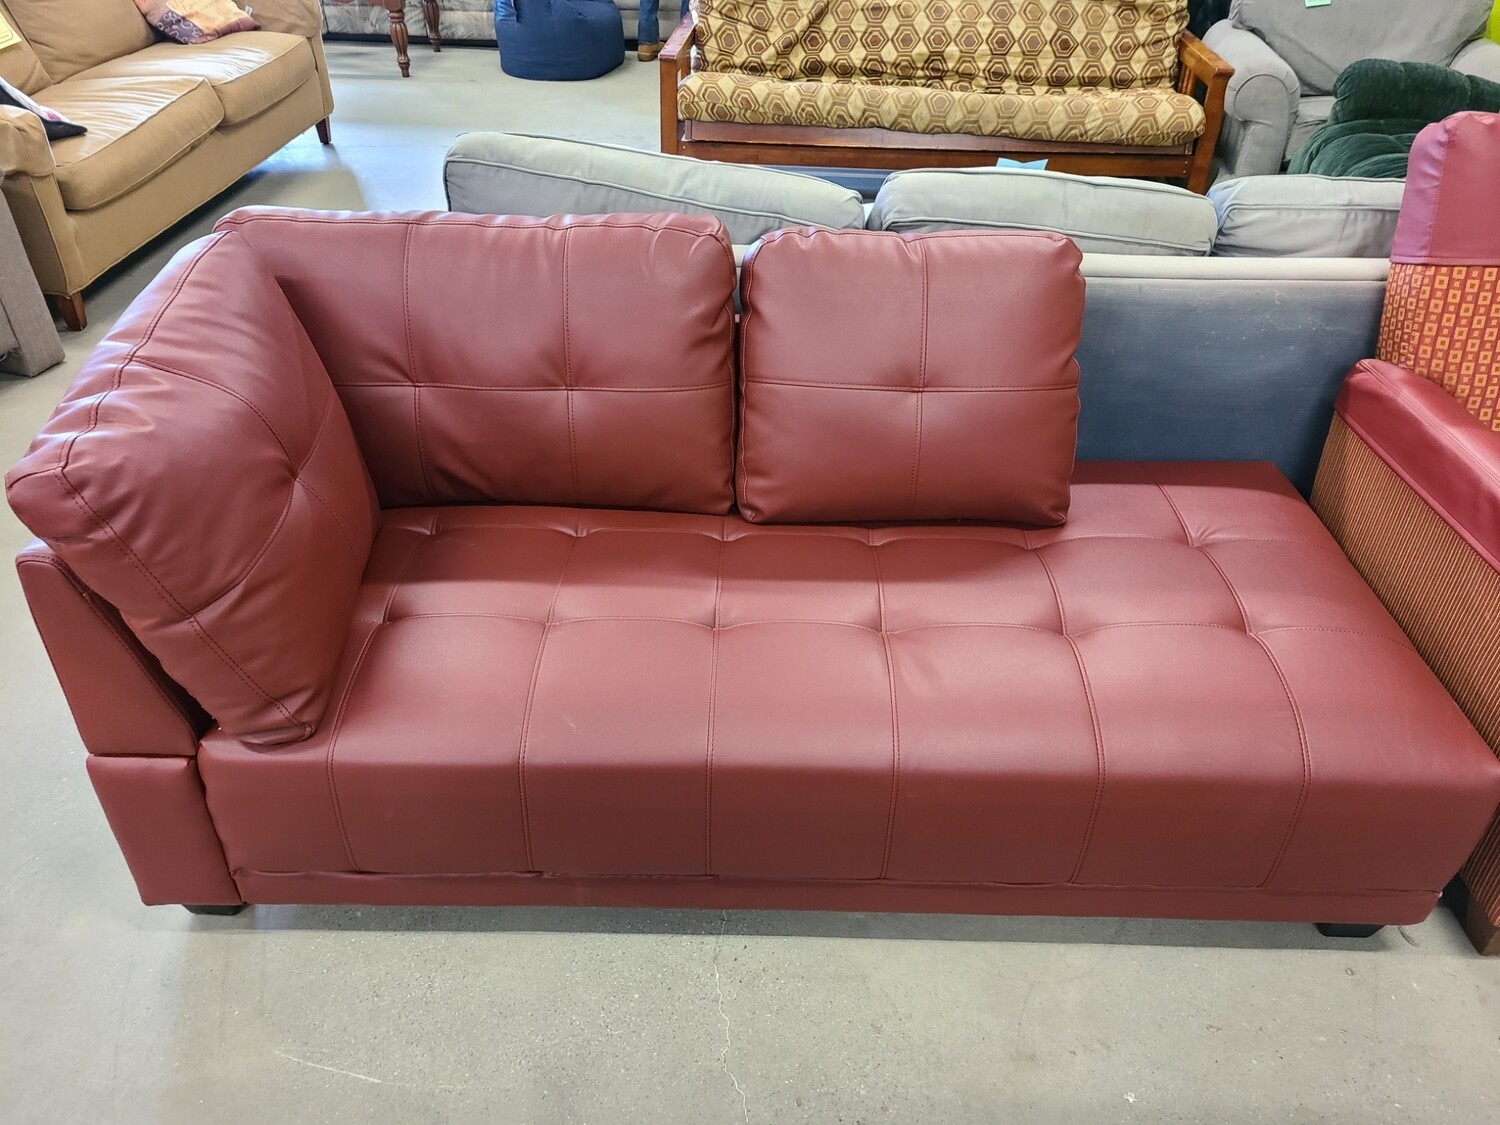 LifeStyle Furniture Right Arm Red Leather Chaise Lounge